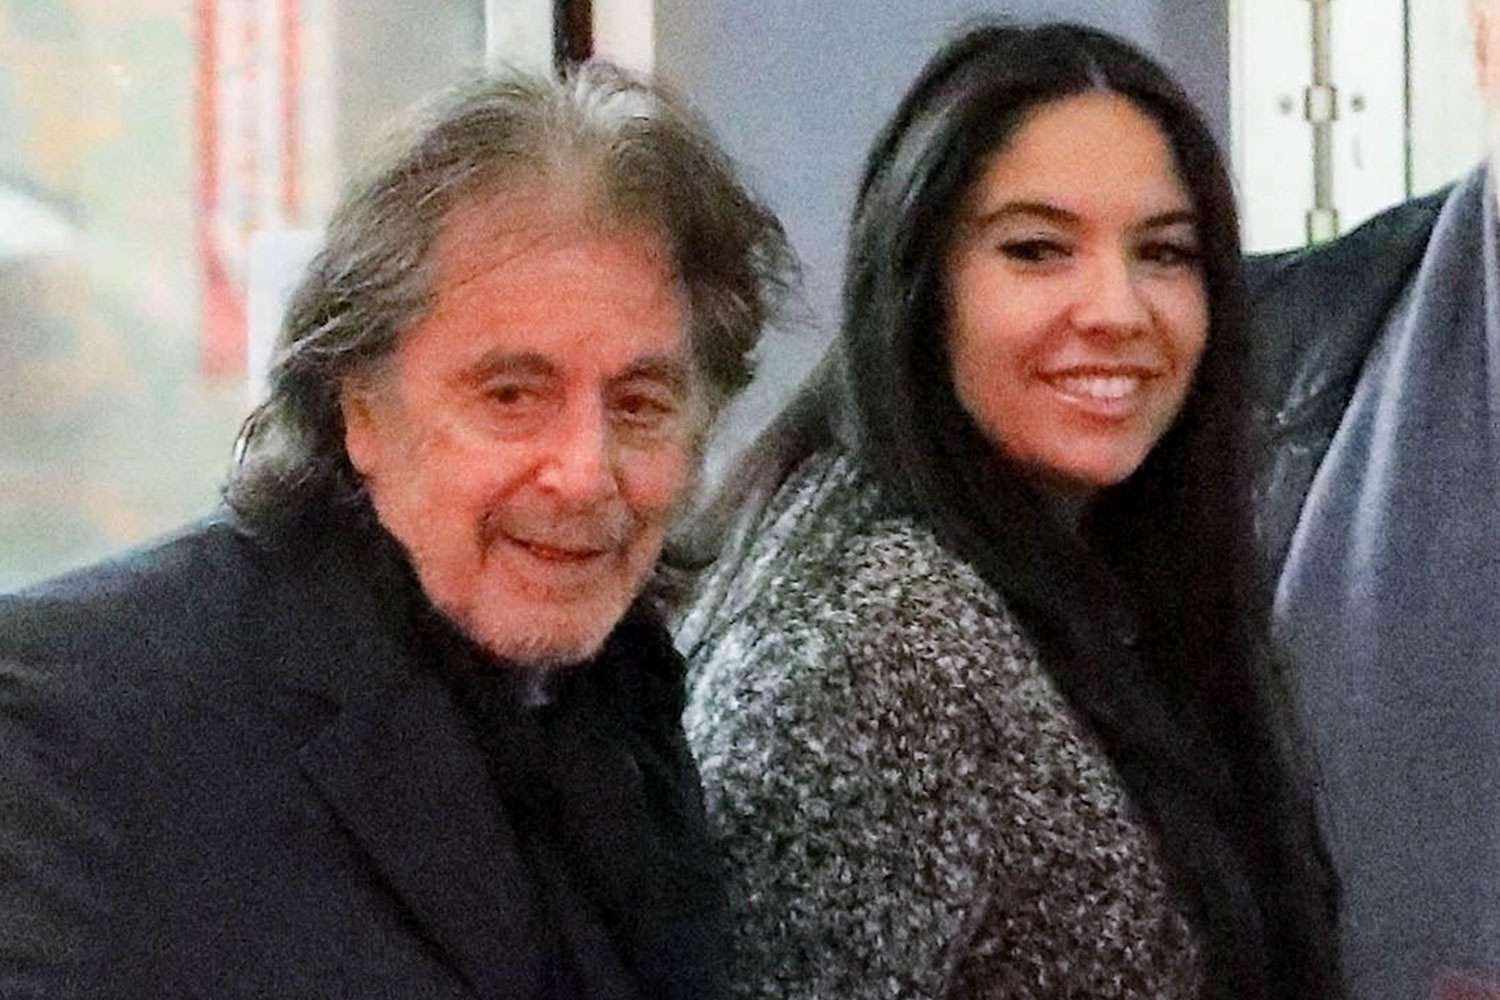 Al Pacino on Forthcoming Child: ‘This is Really Special Coming at This Time’